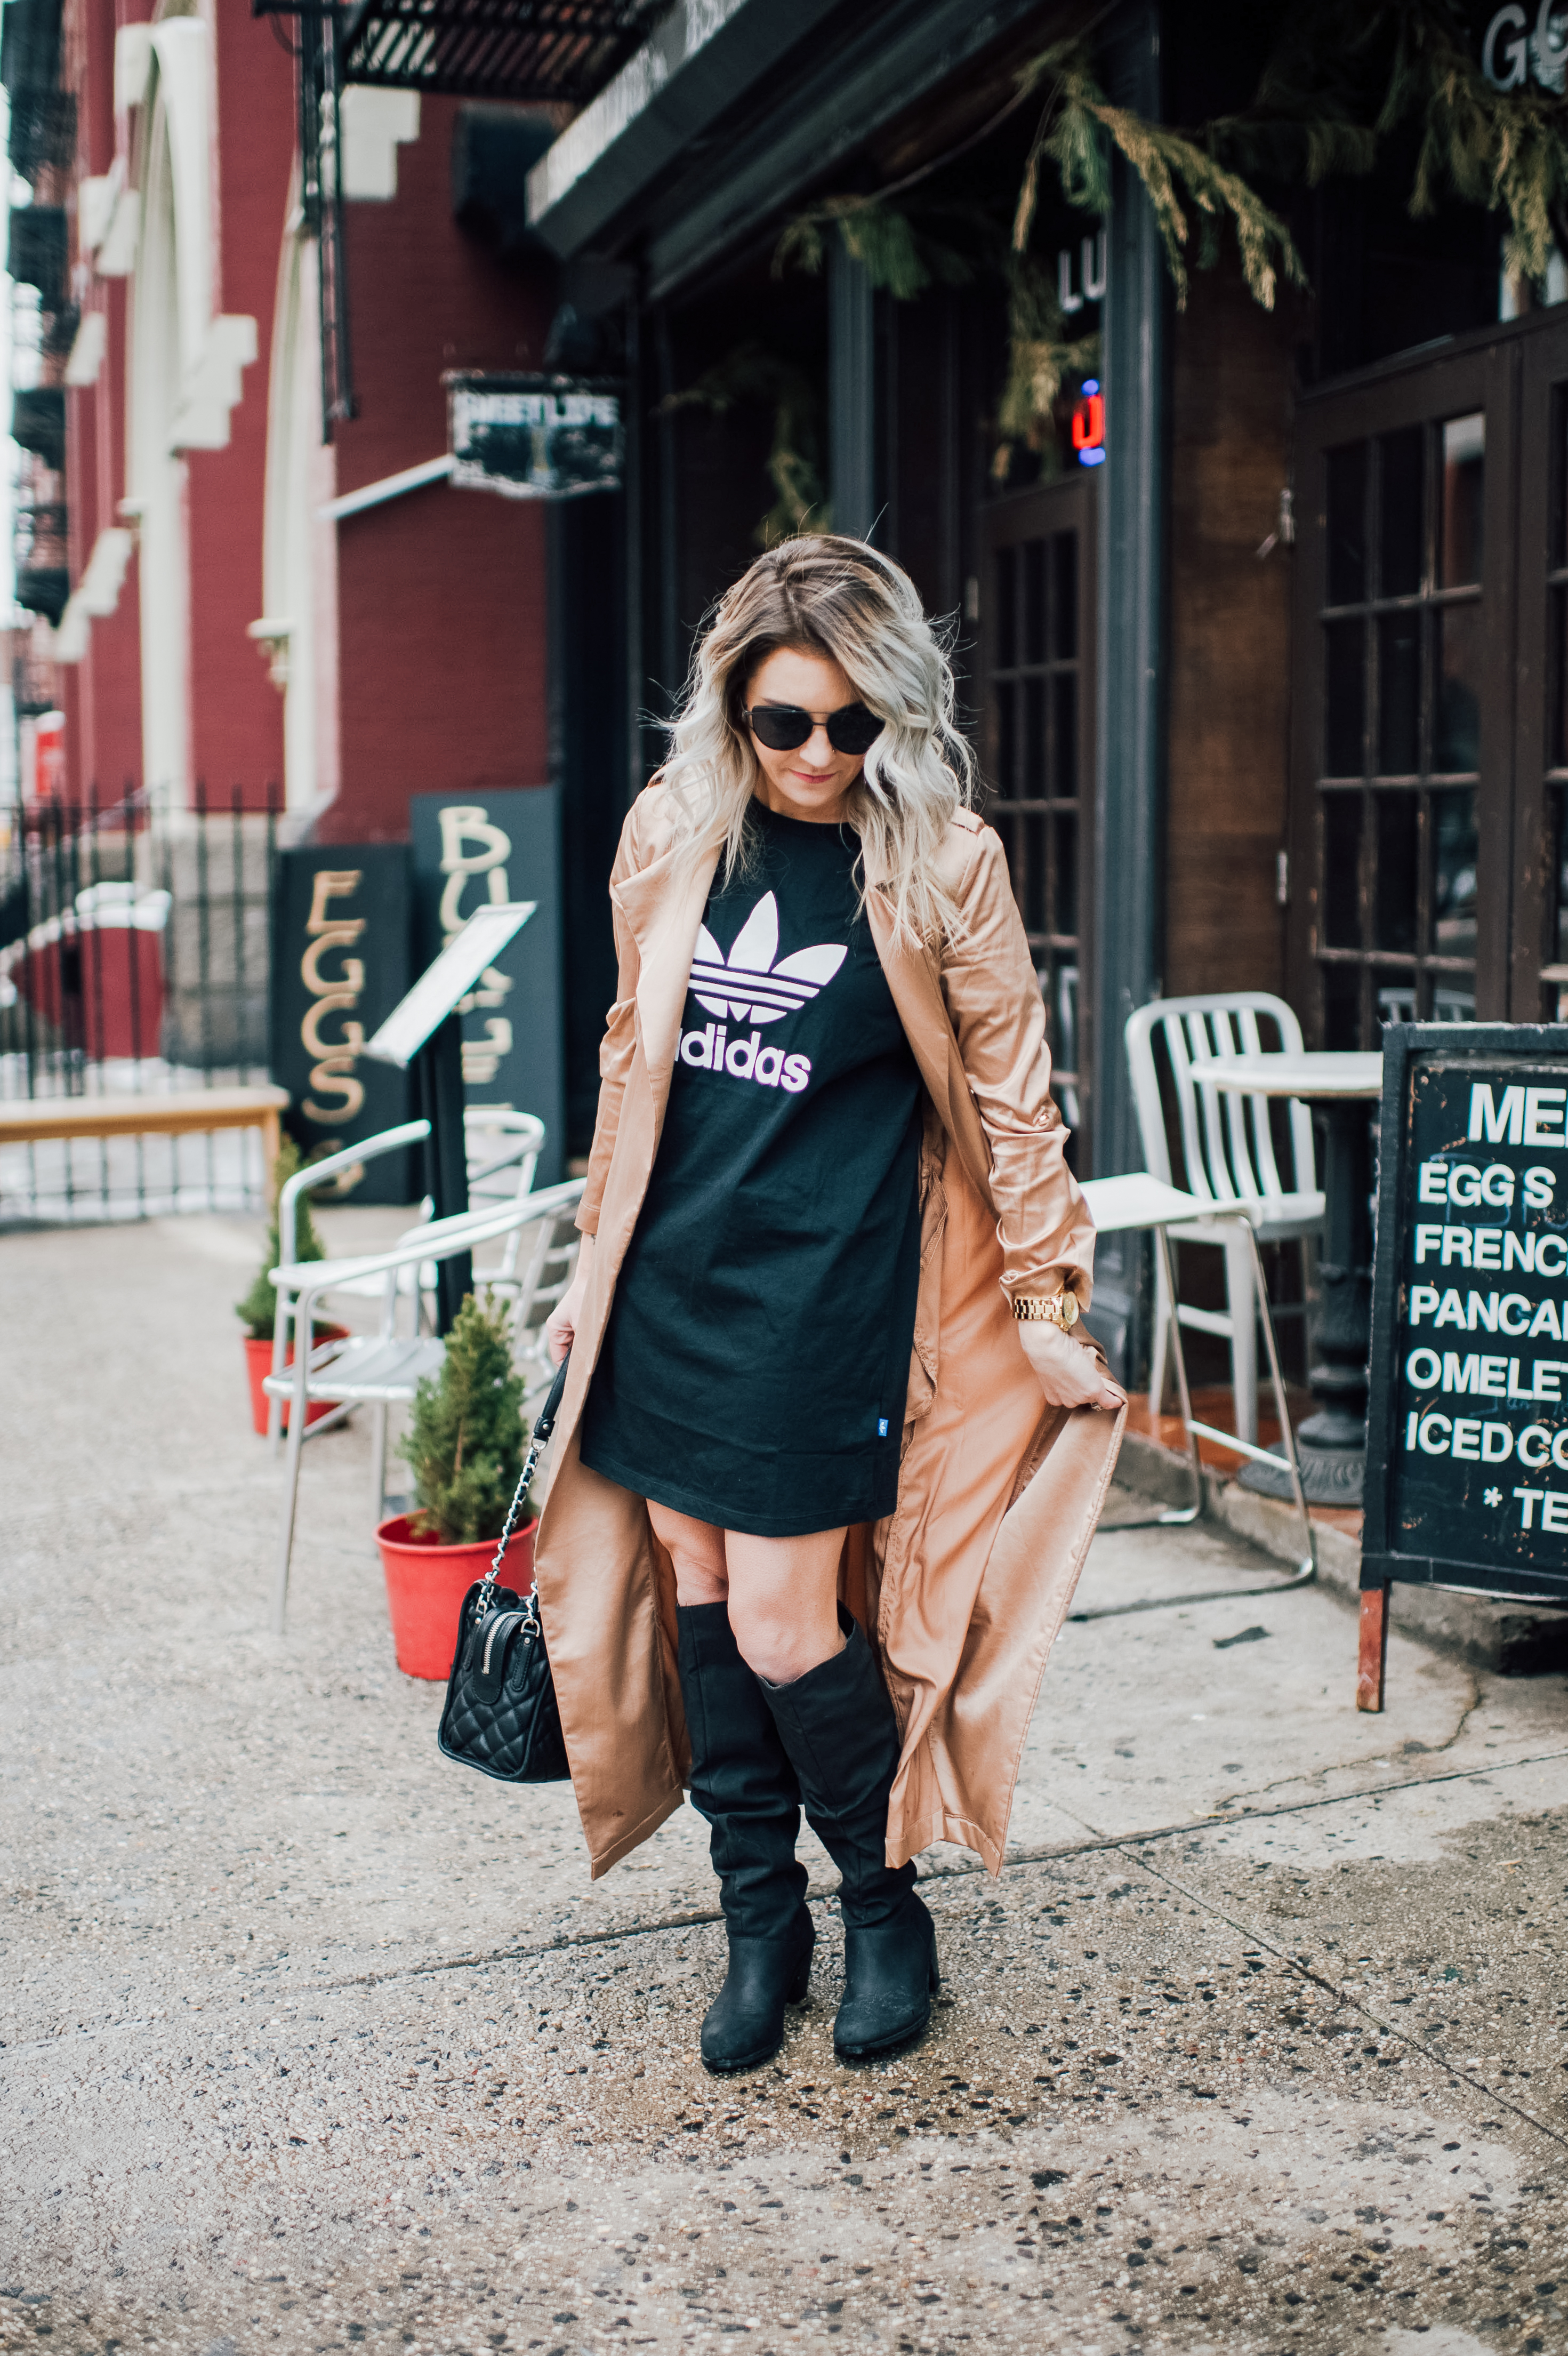 Life and style blogger, The Samantha Show, shares how to style a t-shirt dress. A t-shirt dress is an easy style to dress up or dress down.